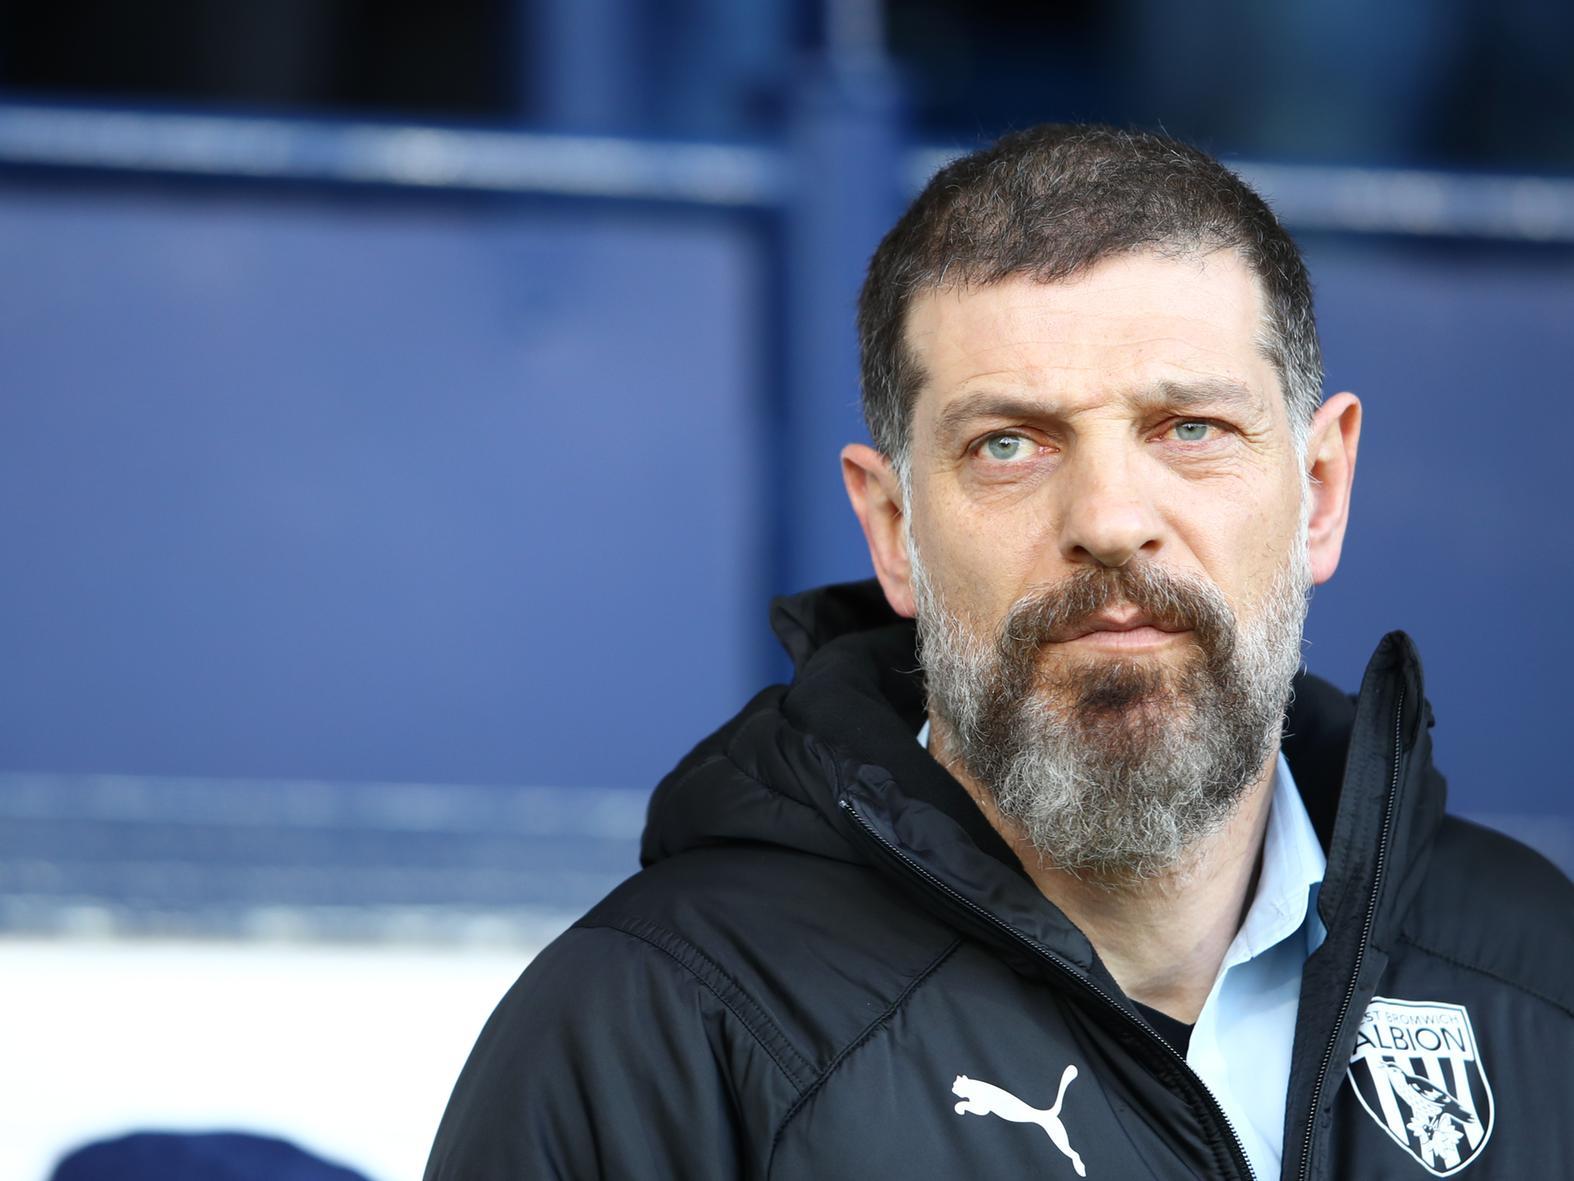 Position: 1st. Points: 69. Points ahead of Leeds: 1.
Average position of remaining opponents: 11th (11.4).
Pictured: West Brom boss Slaven Bilic. Photo by Mark Thompson/Getty Images.